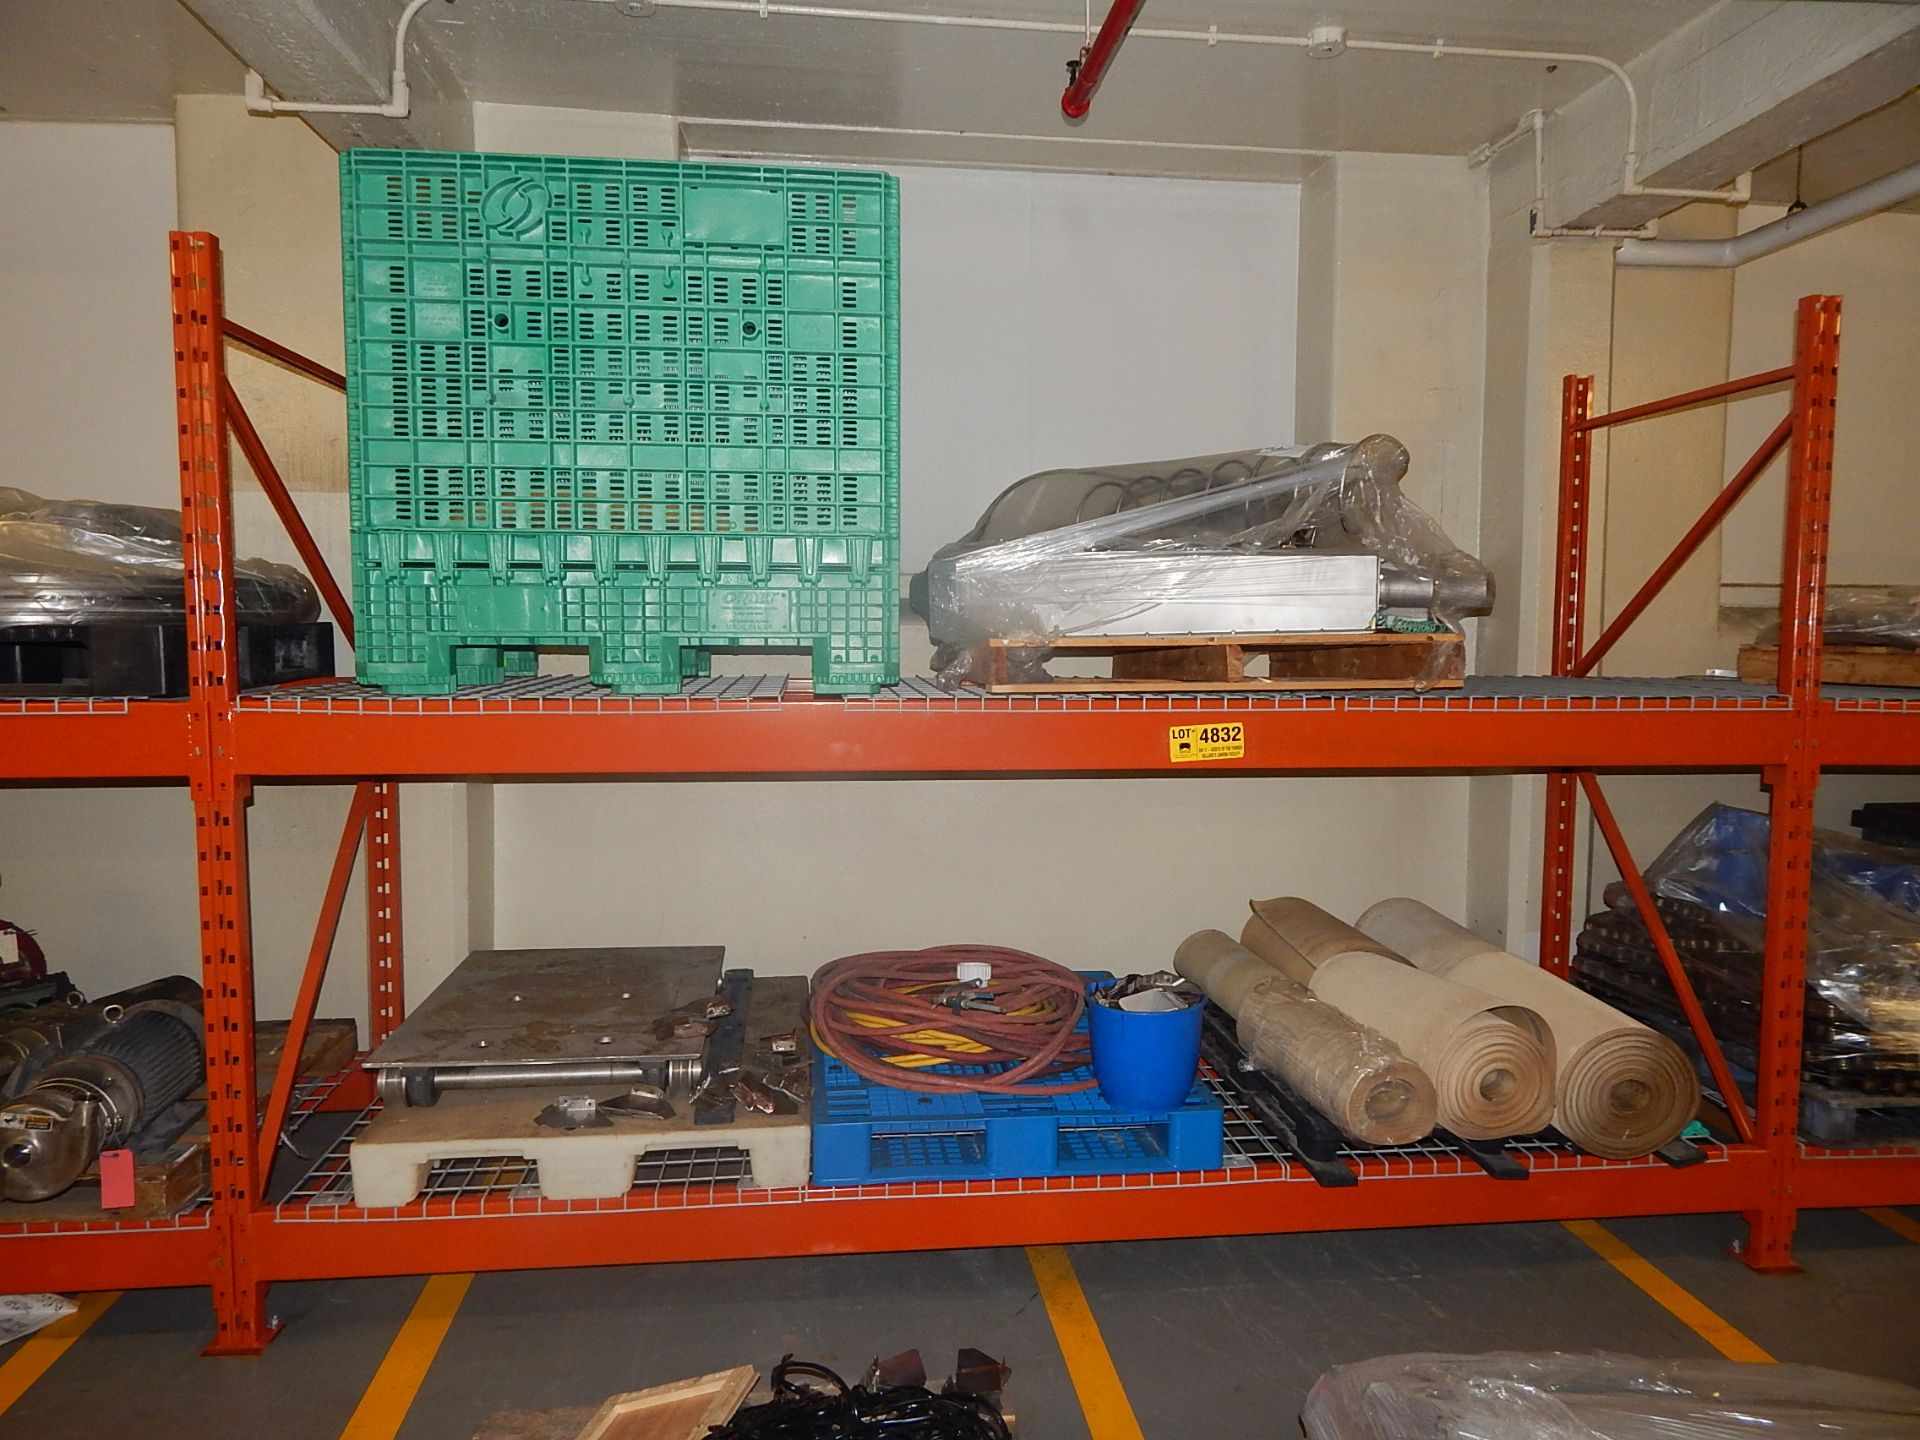 LOT/ SHELF WITH CONTENTS CONSISTING OF BELTS, HOSE AND PARTS (BUILDING 1A, GROUND)